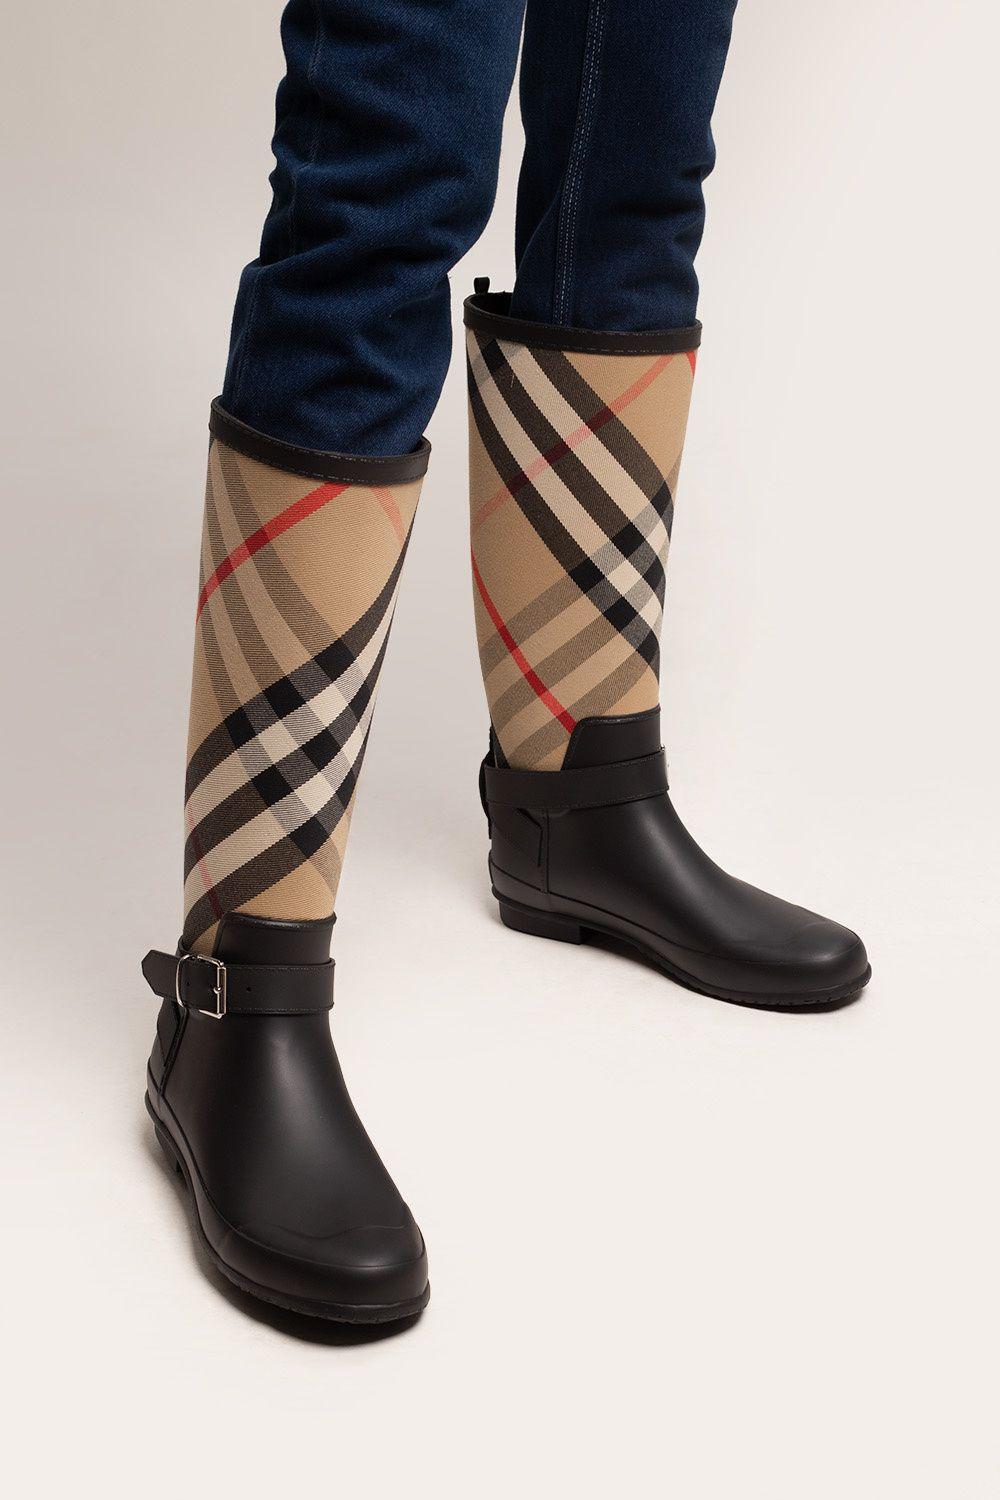 Burberry 'house Check' Rain Boots in Natural | Lyst